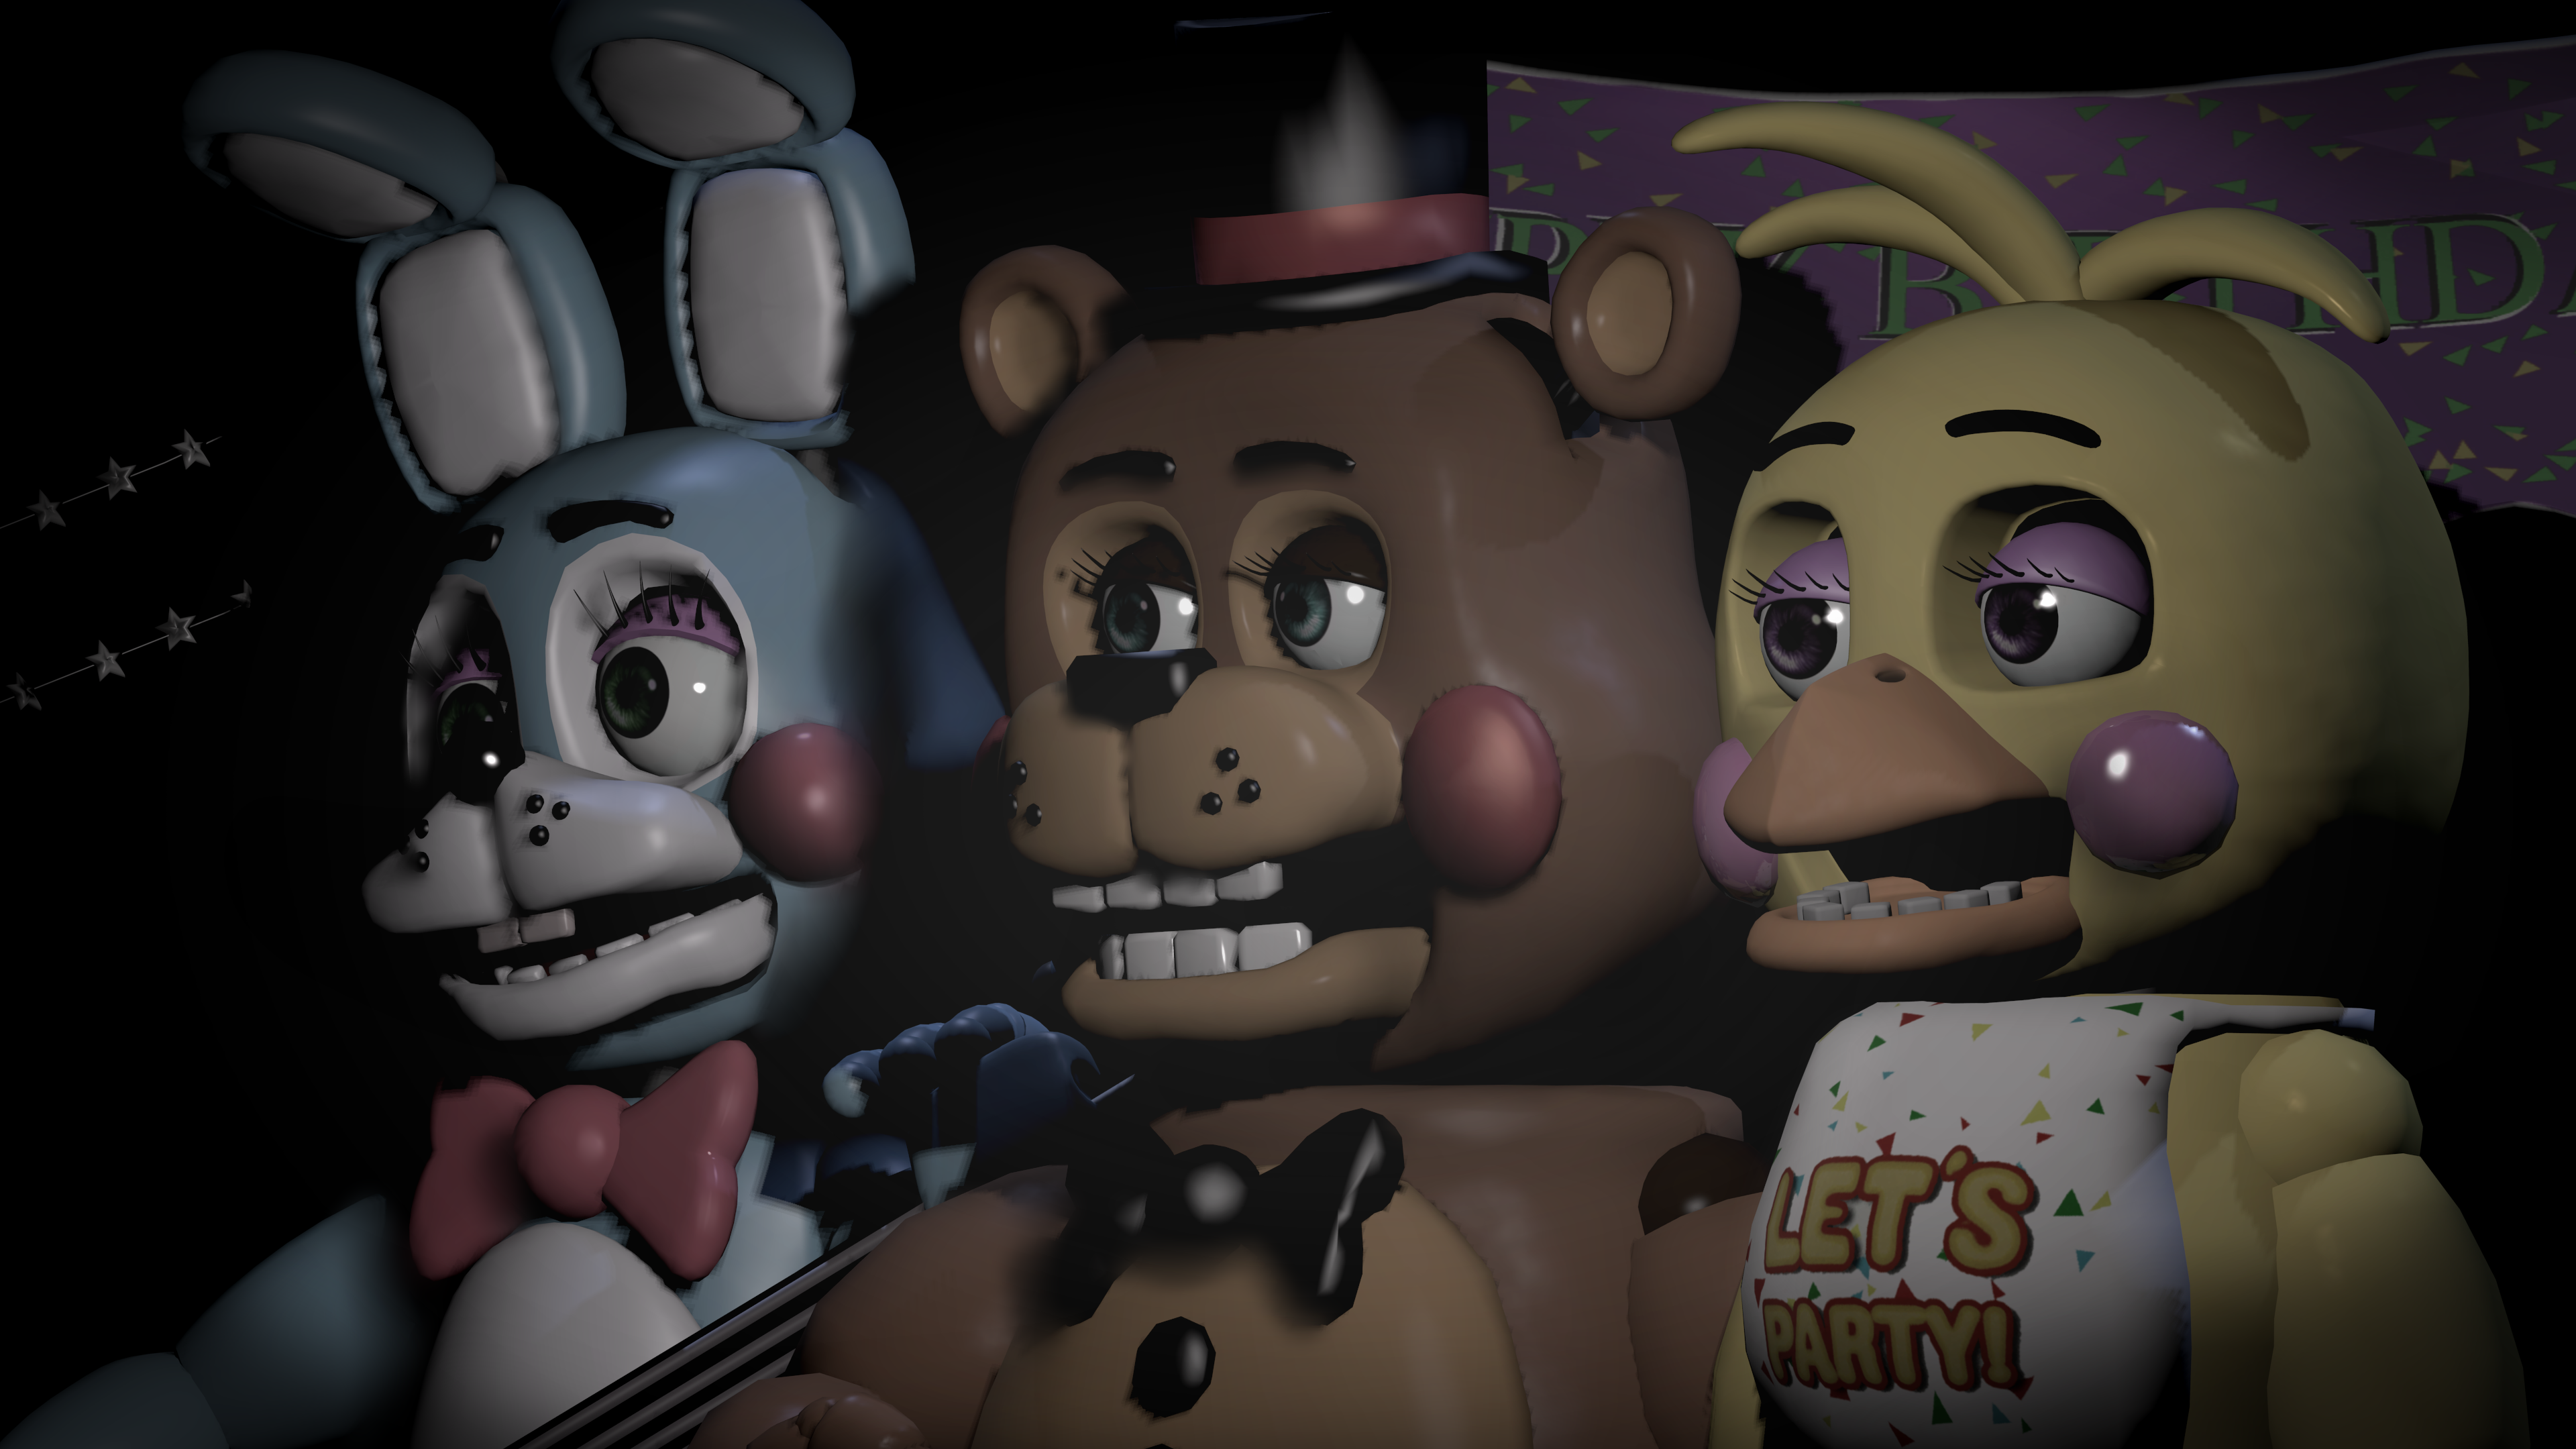 Video Game Five Nights At Freddy 039 S 2 3840x2160